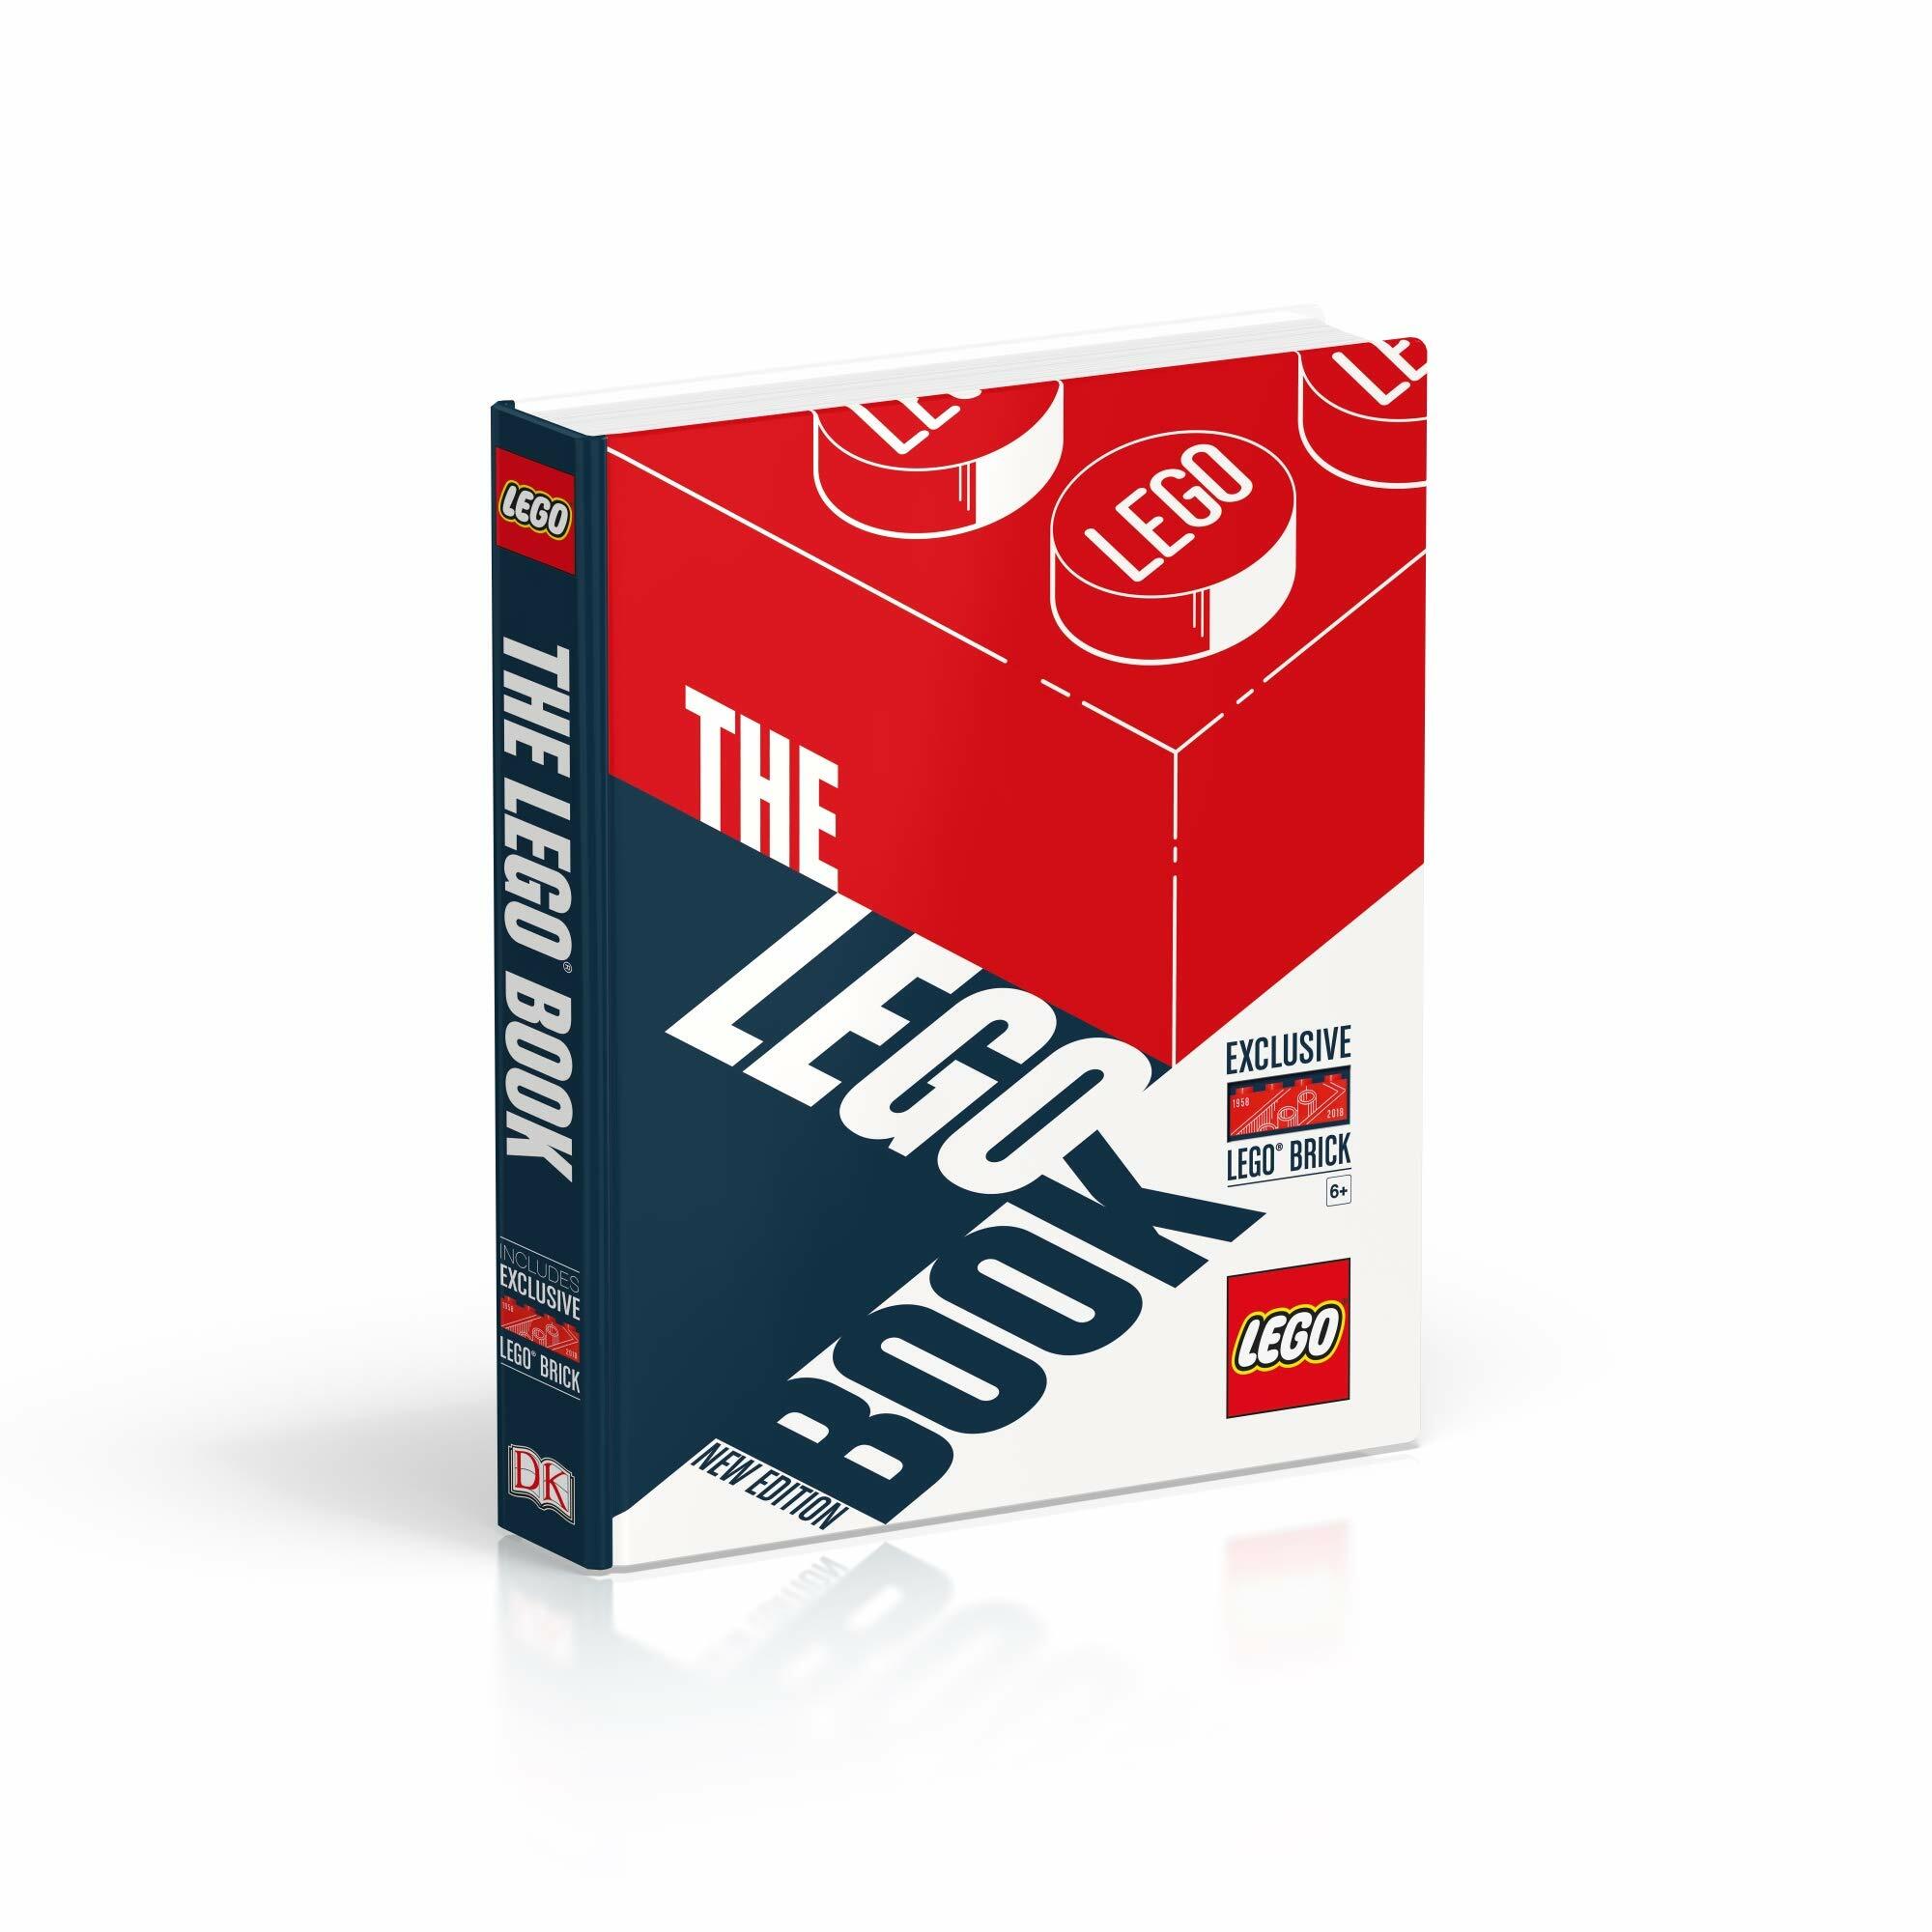 The LEGO Book New Edition : with exclusive LEGO brick (Hardcover)